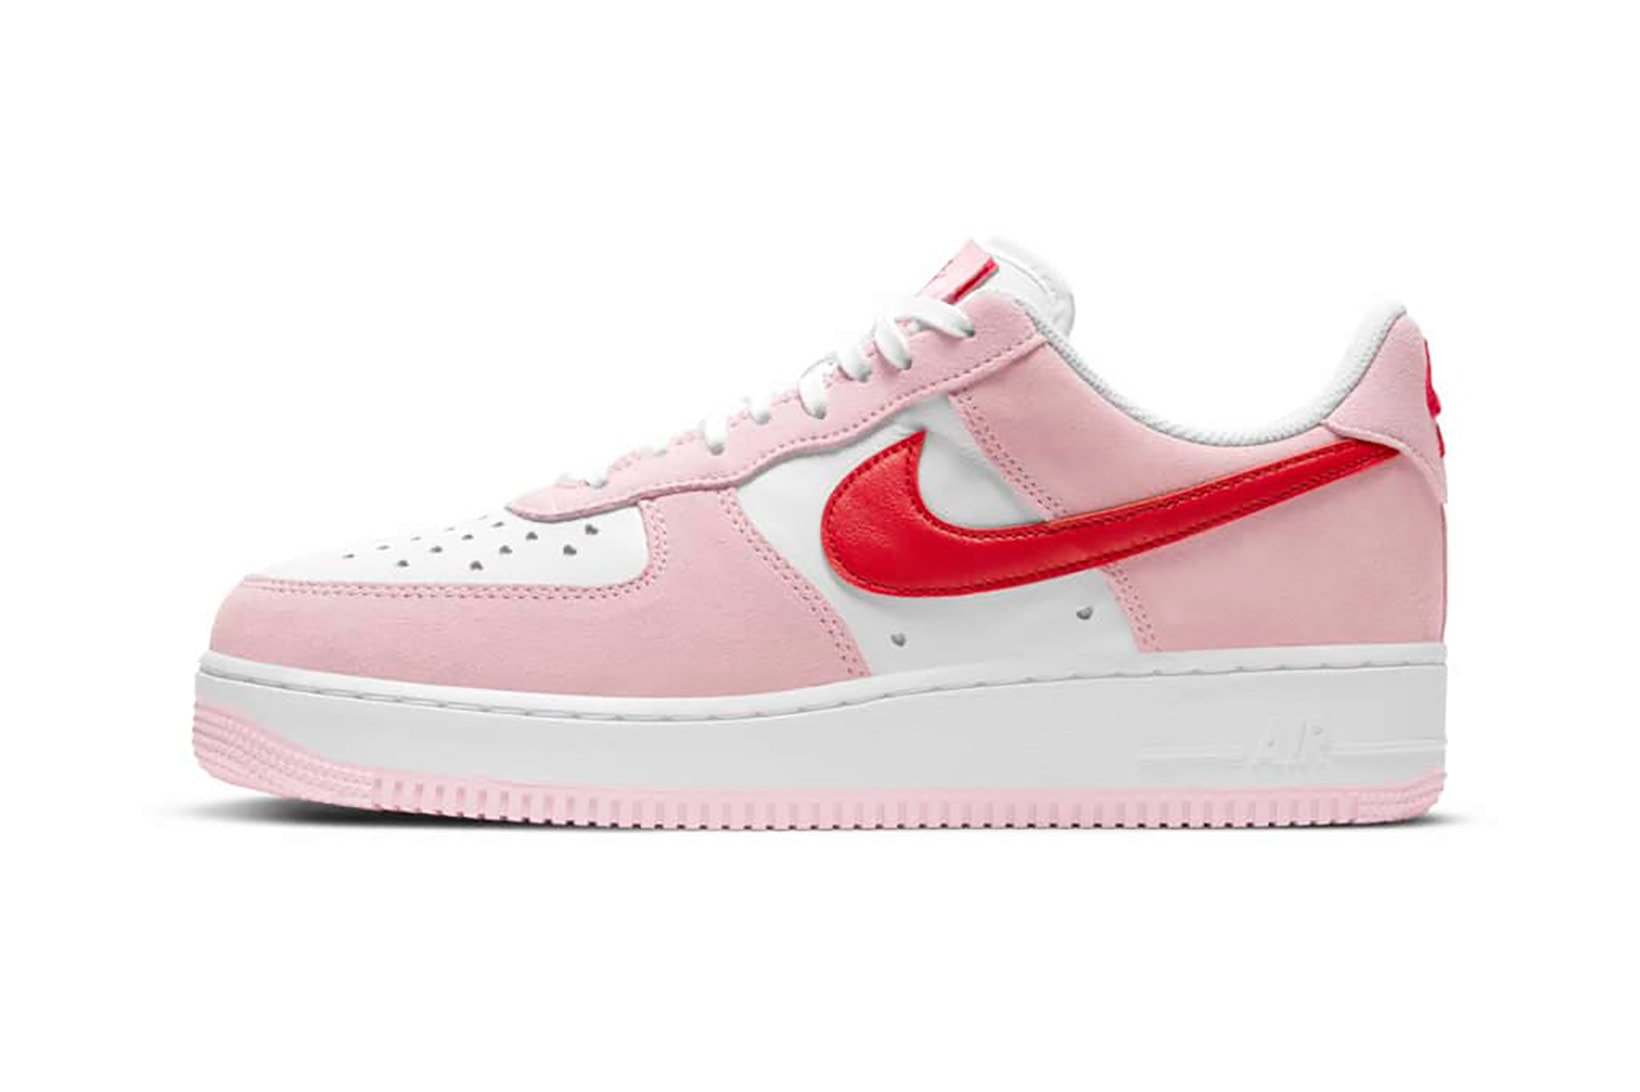 nike air force 1 af1 07 valentines day sneakers pink red white shoes footwear kicks sneakerhead lateral